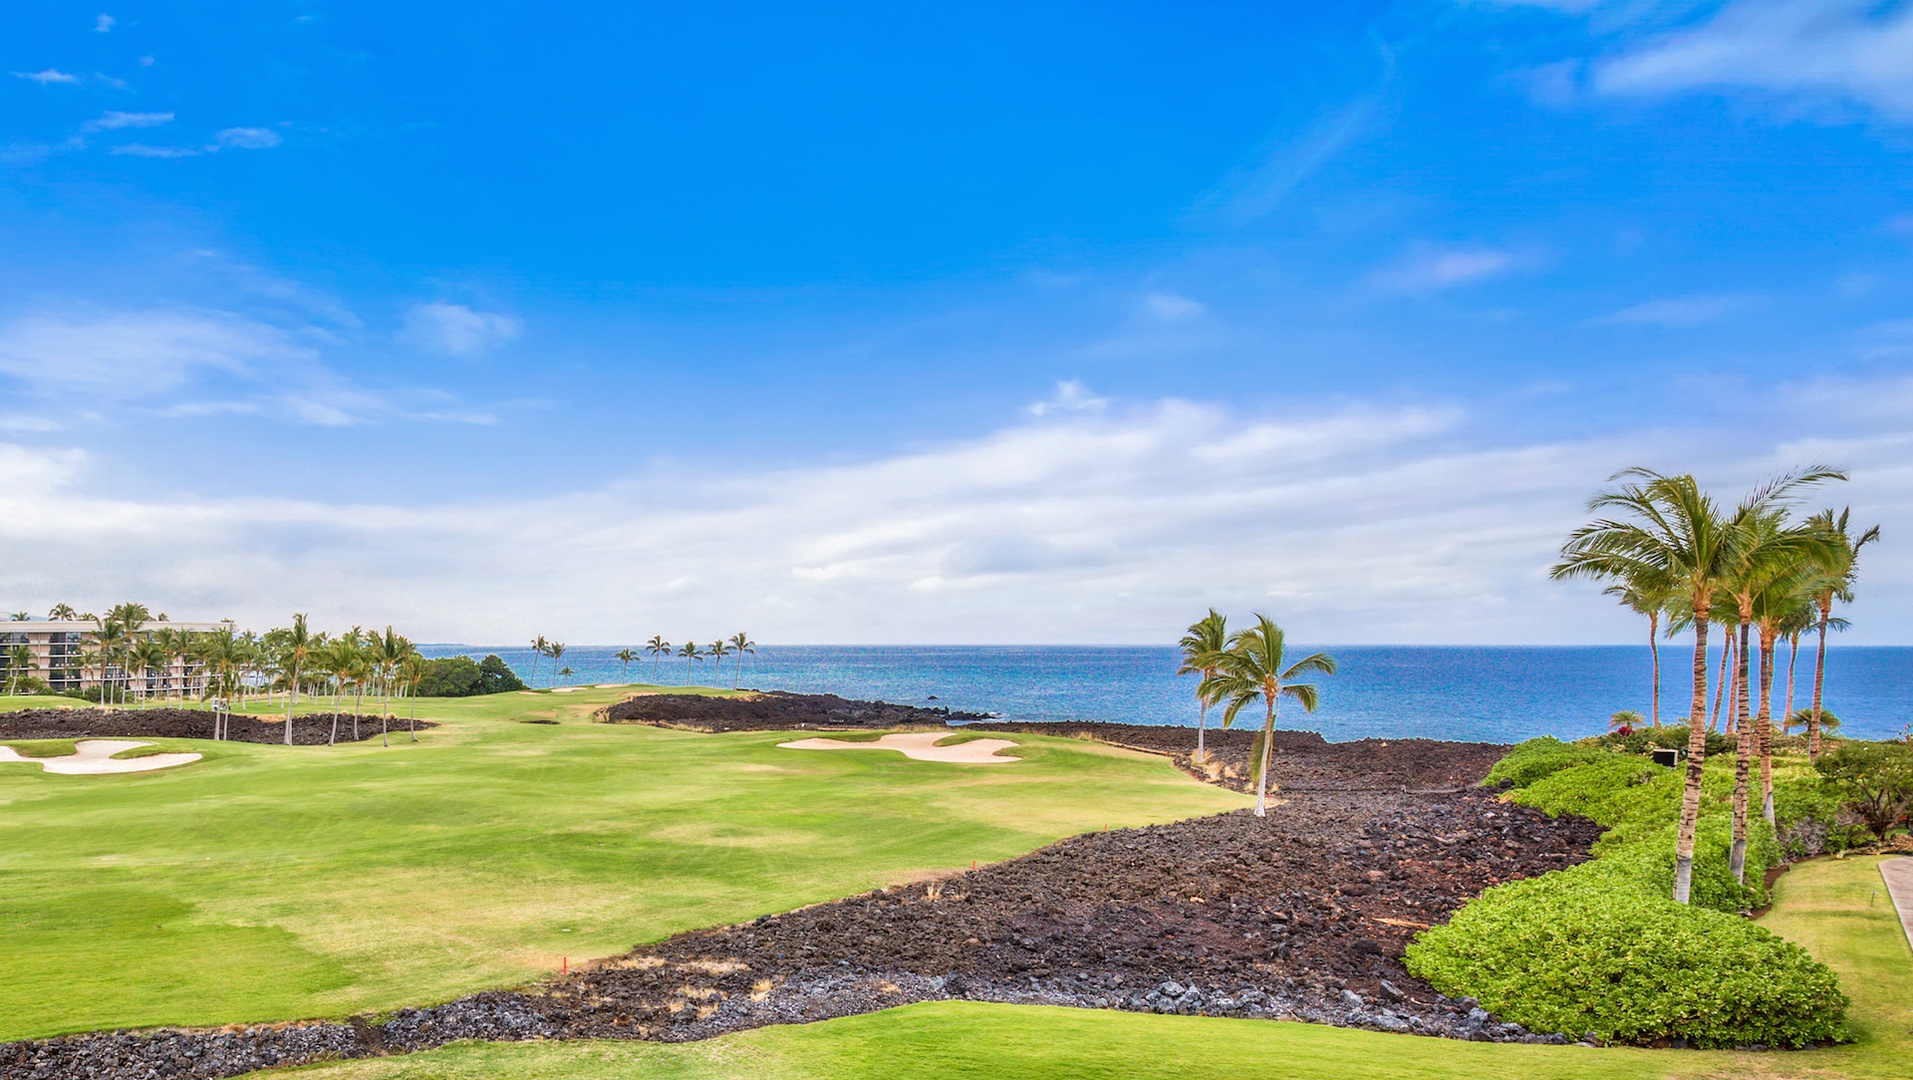 Waikoloa Vacation Rentals, 3BD Hali'i Kai (12G) at Waikoloa Resort - Picture yourself here! Actual view from YOUR lanai!